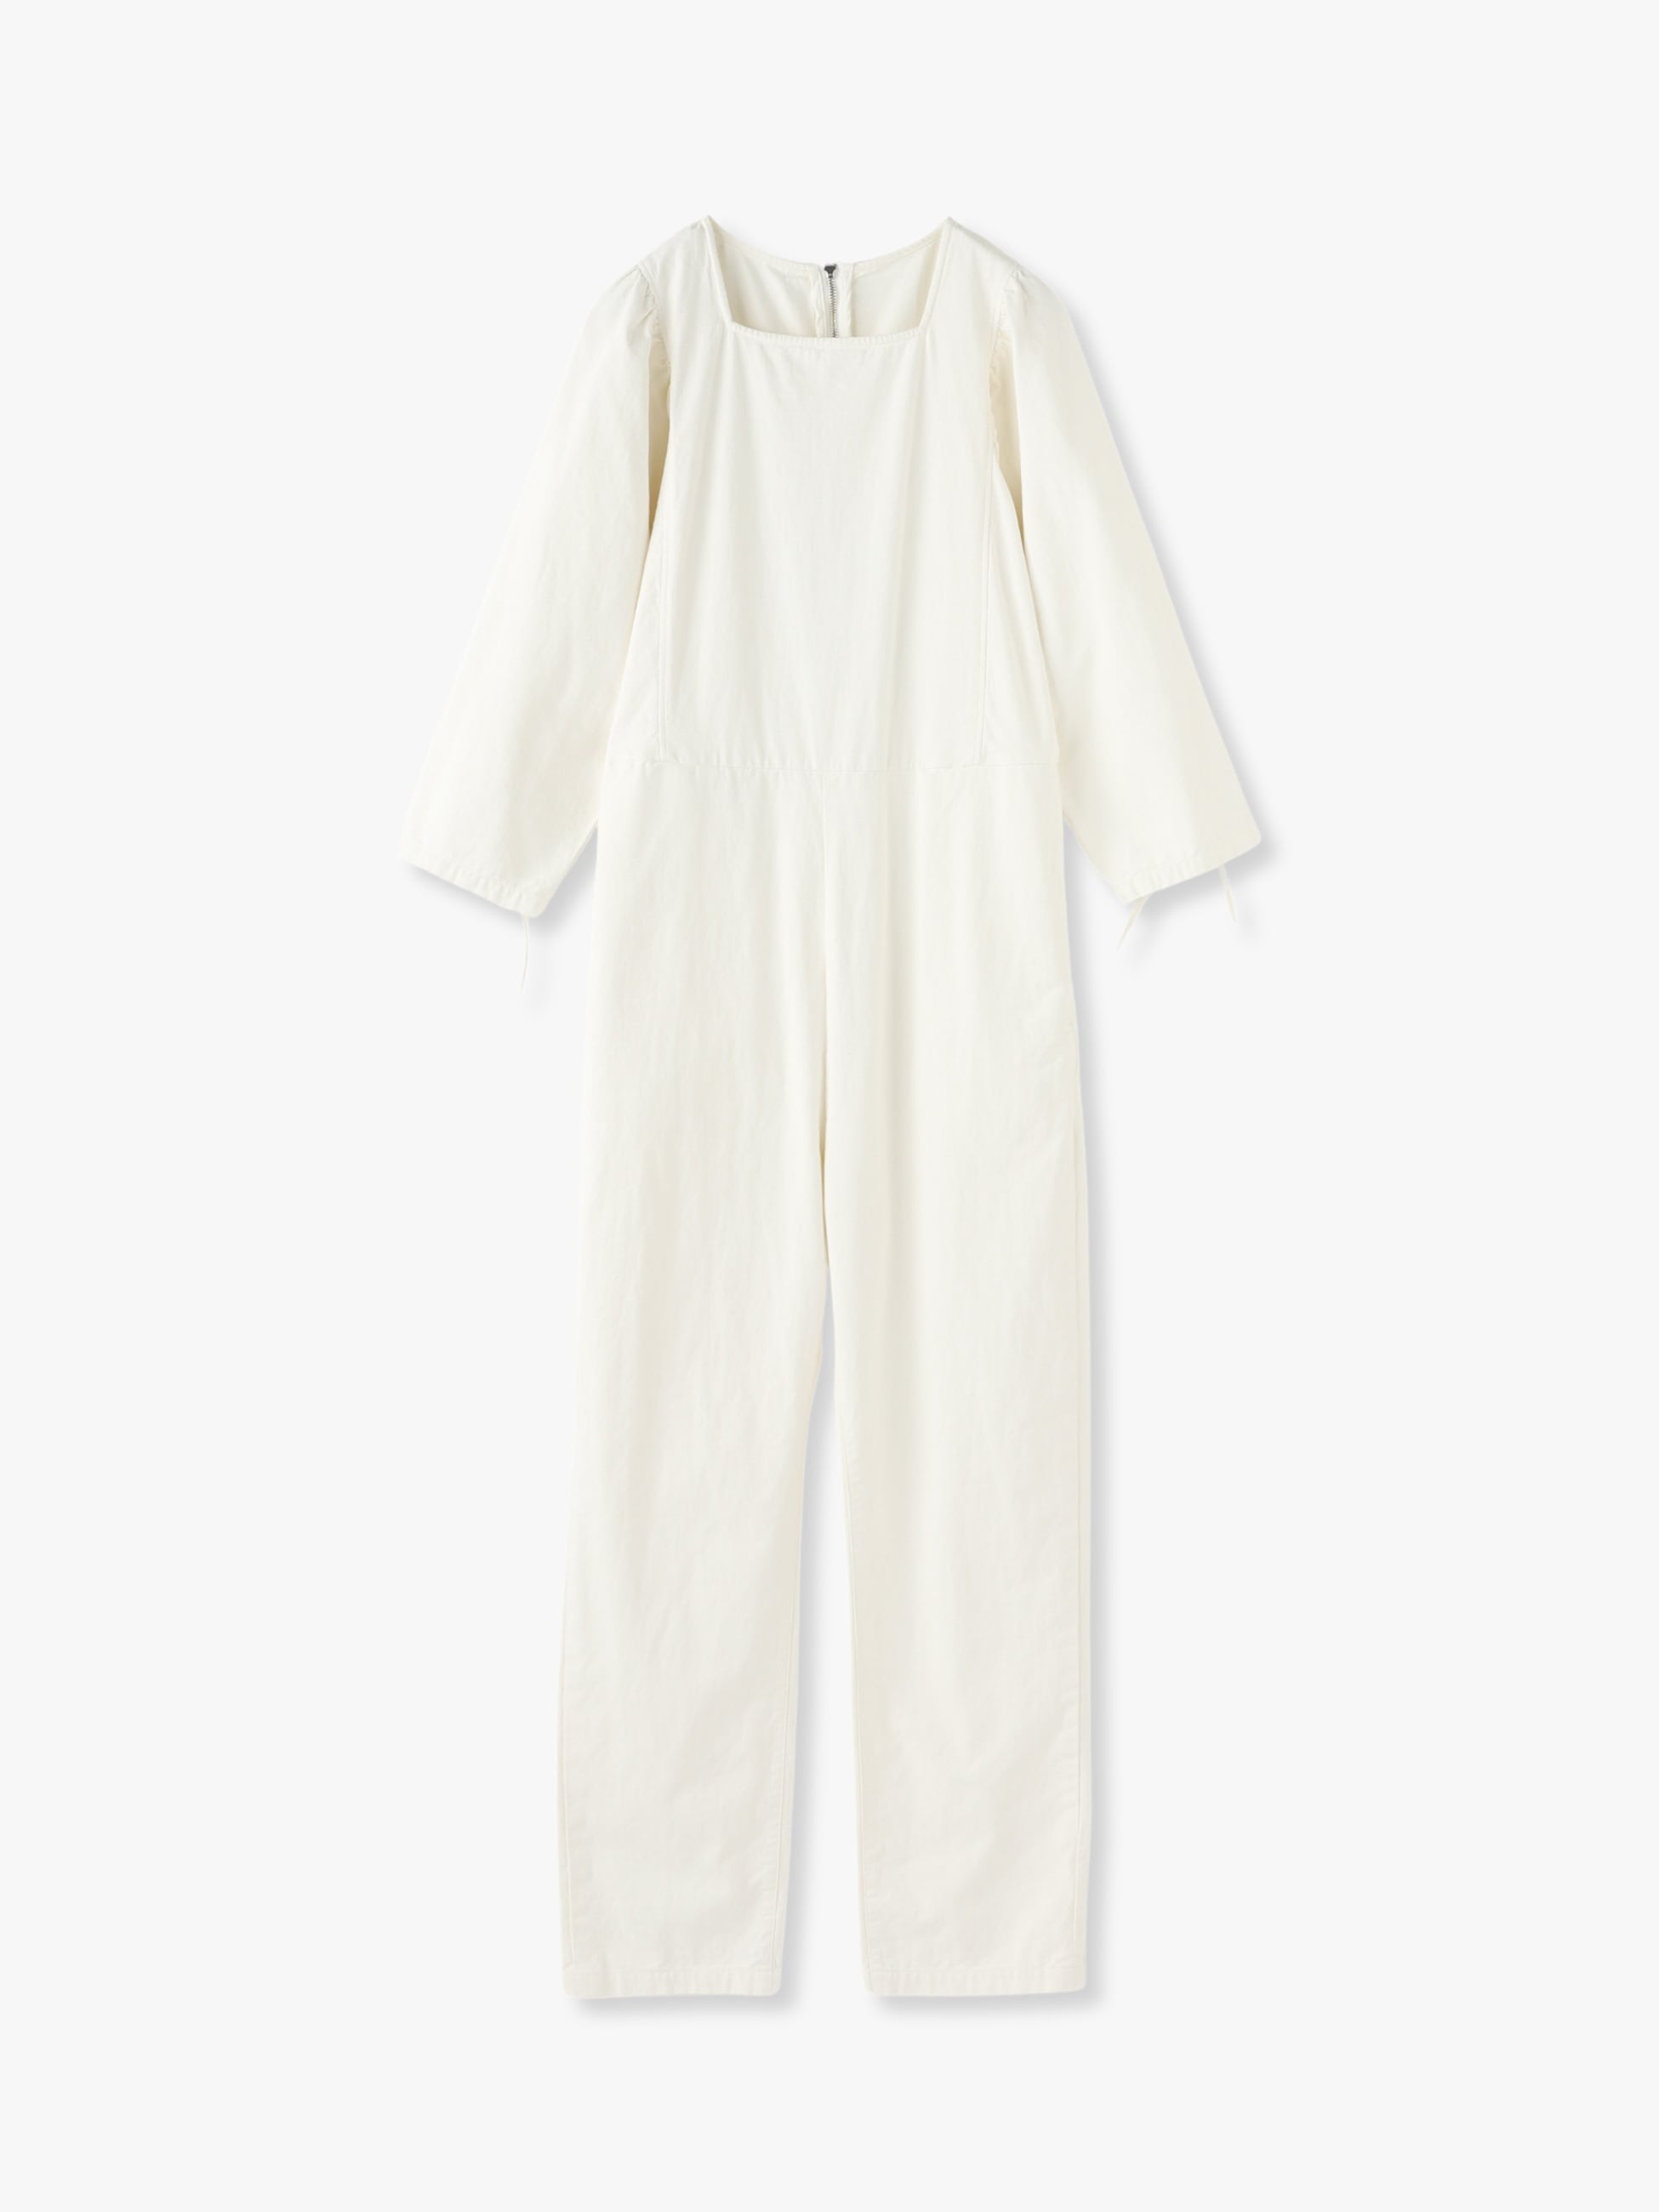 RH Vintage WHITE coverall